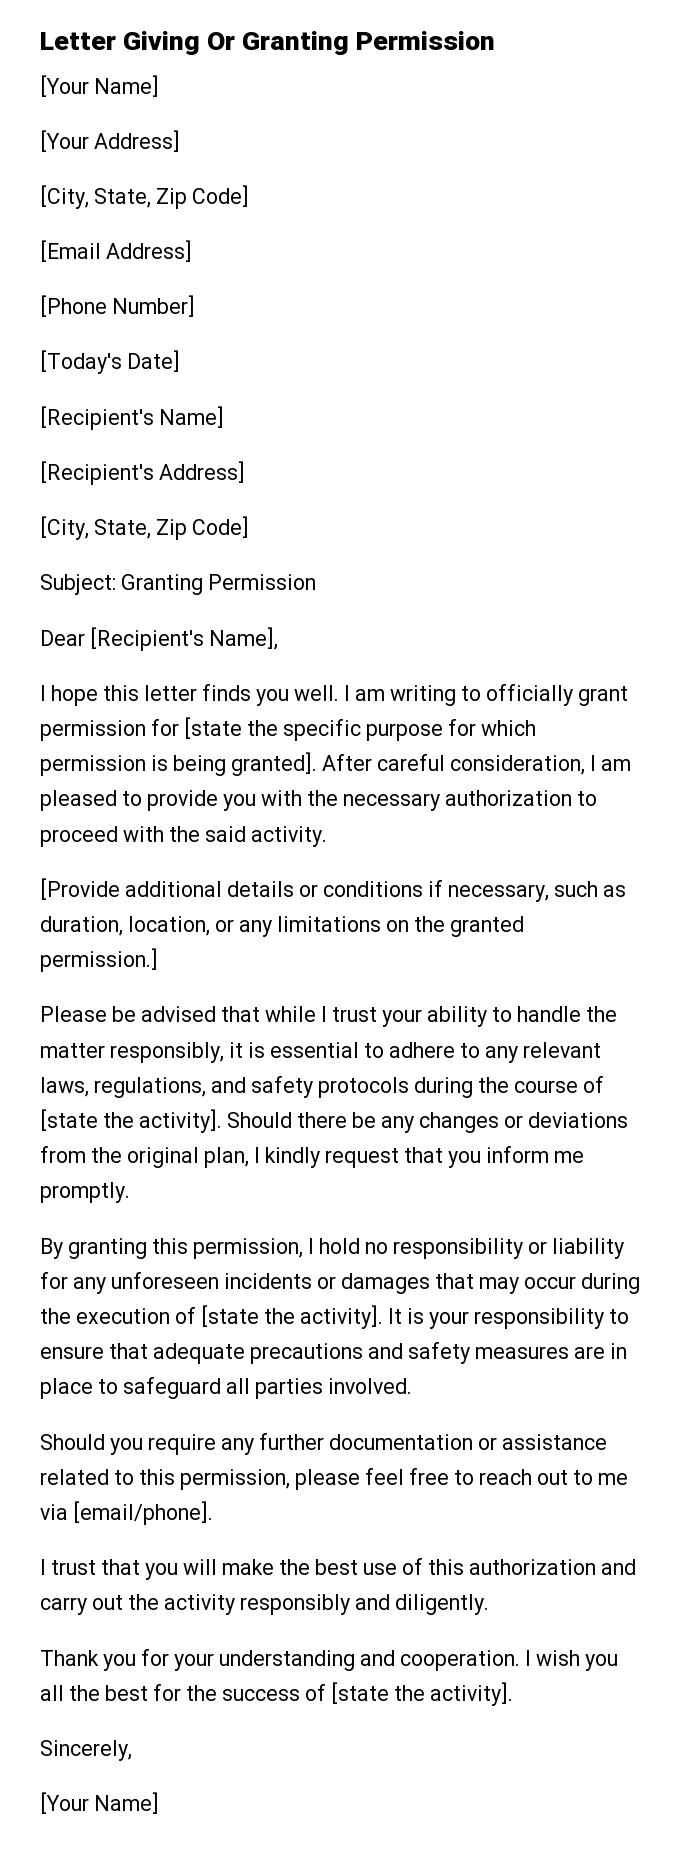 Letter Giving Or Granting Permission